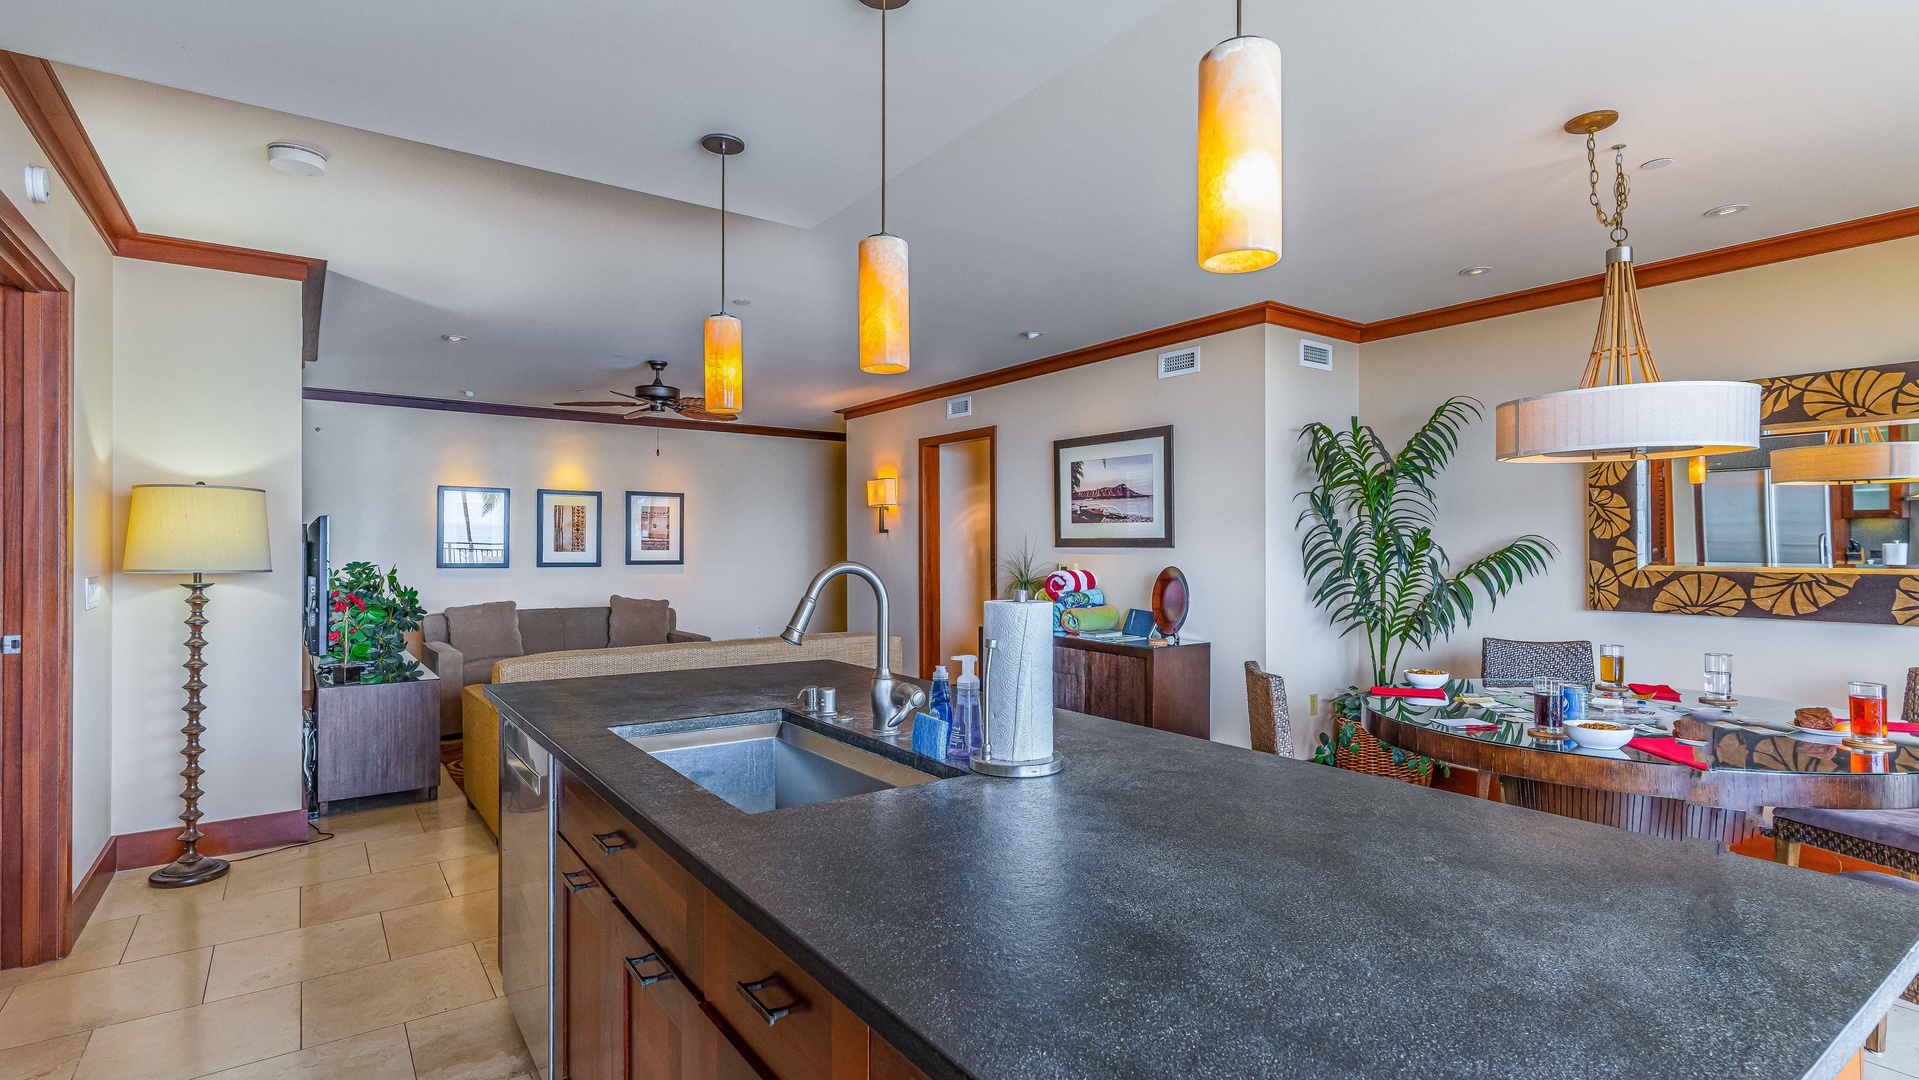 Kapolei Vacation Rentals, Ko Olina Beach Villas B310 - The open floor plan includes kitchen, dining and living areas with natural lighting.